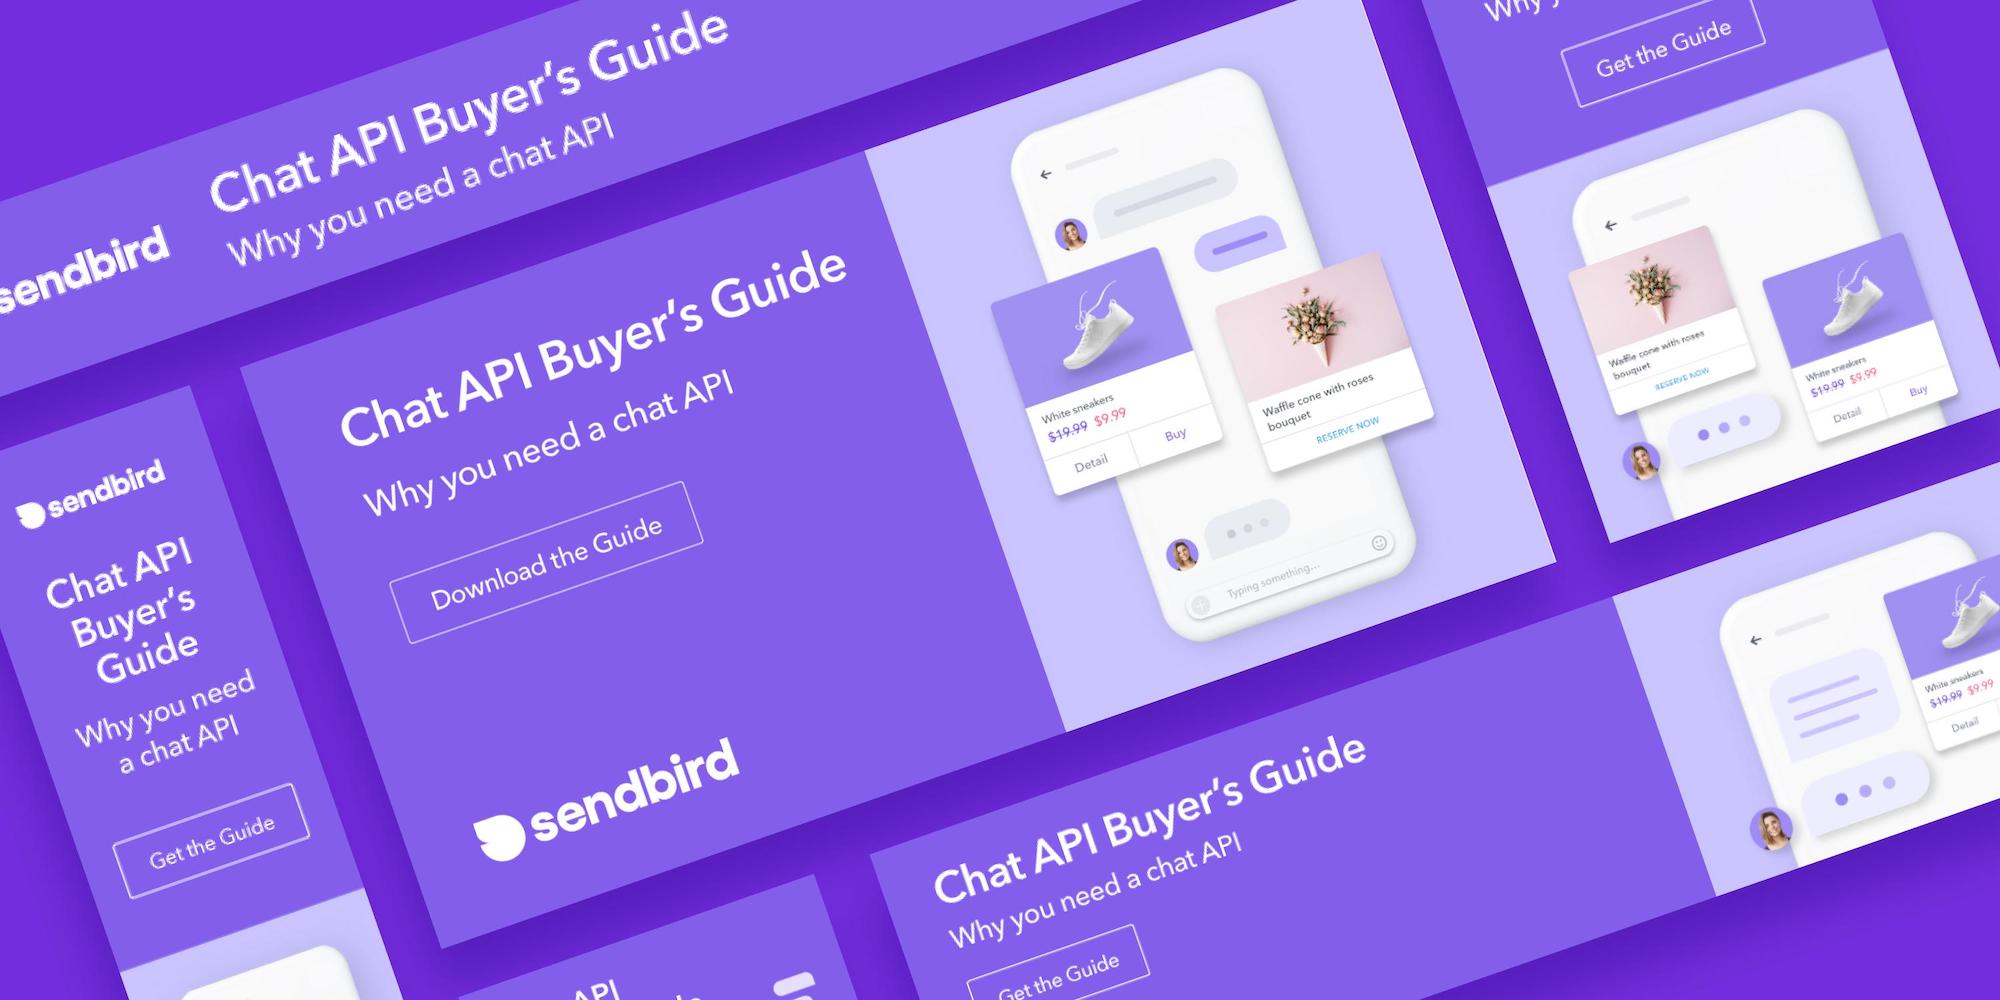 Compilation of mockups featuring Sendbird's Chat API Buyer's Guide paid ads